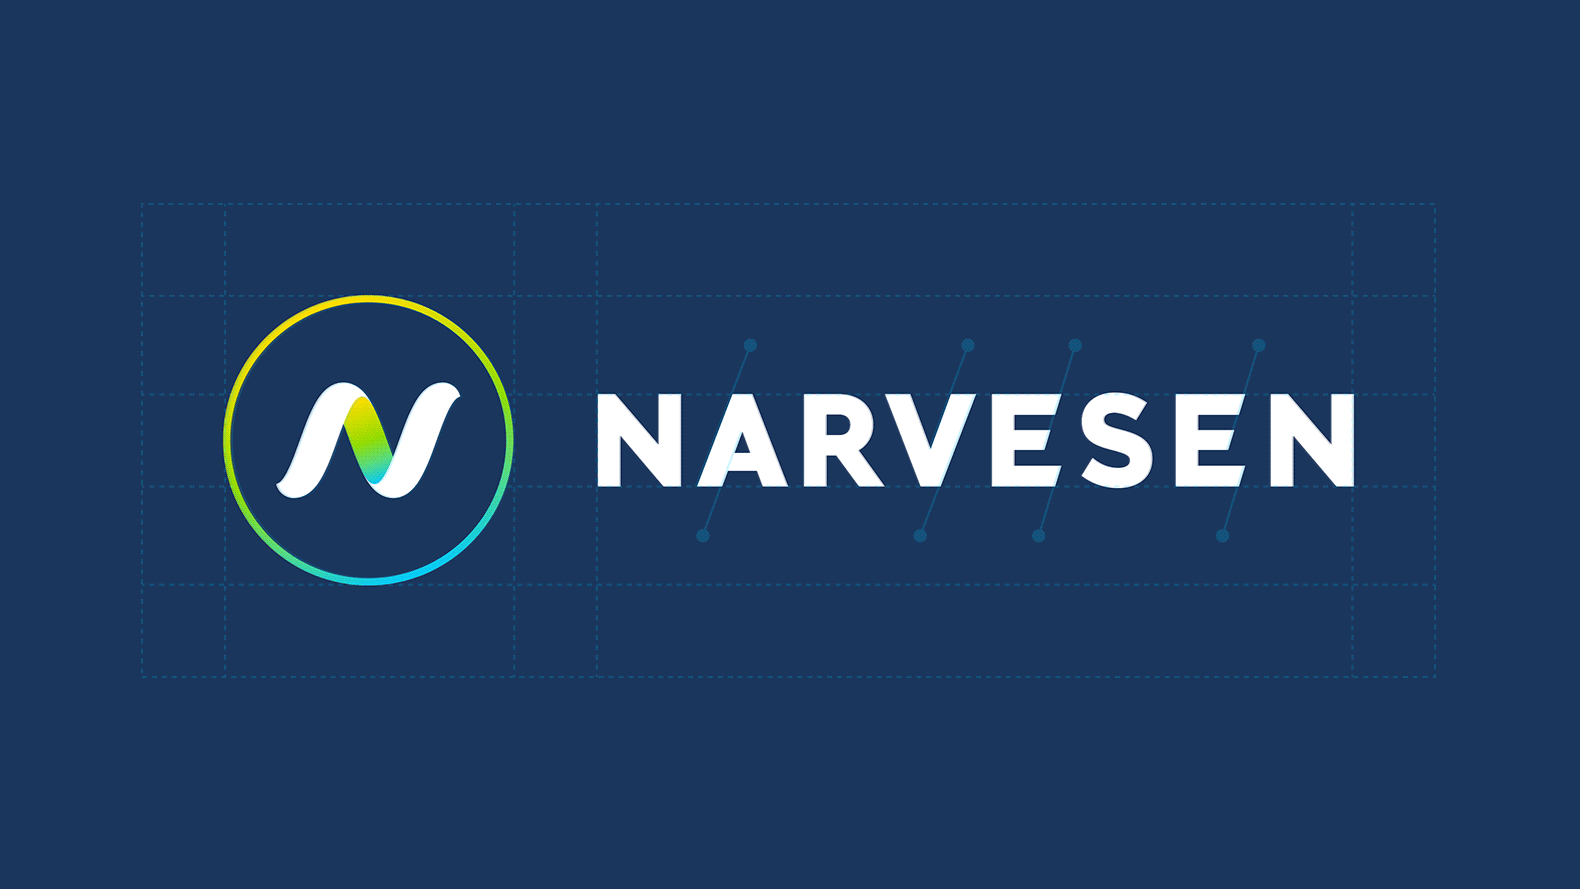 The collaboration Narvesen has with the design agency Mission has designed a new identity and logo.